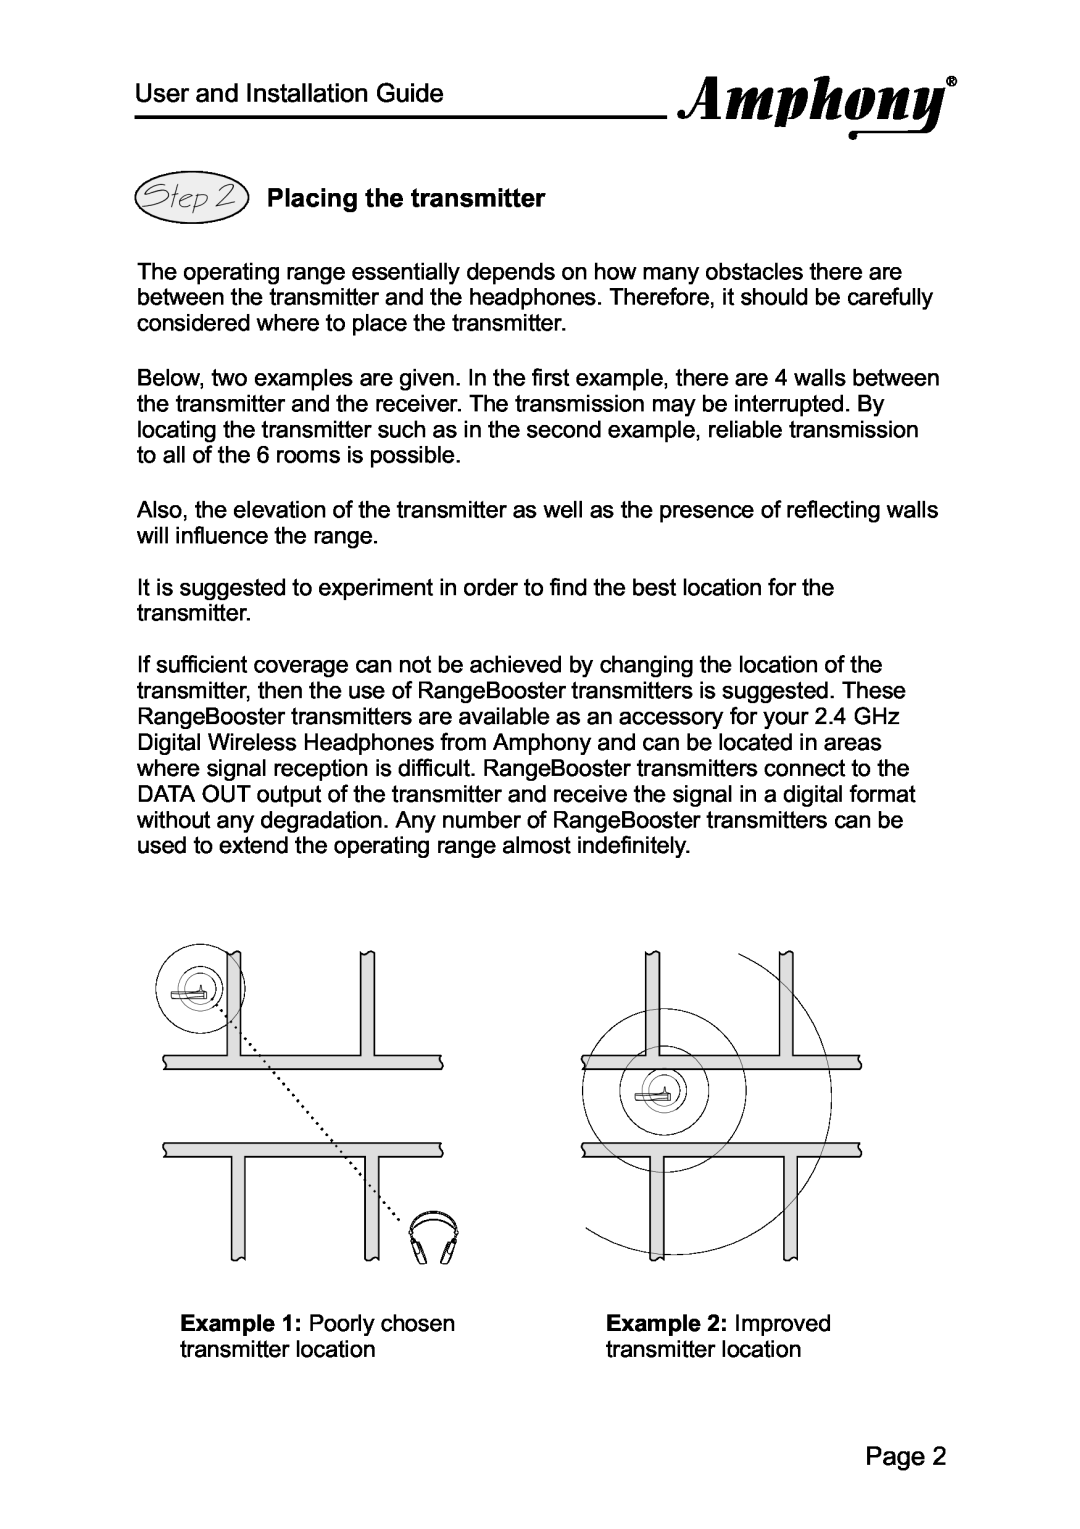 Amphony 1000 manual Placing the transmitter, Example 2 Improved, User and Installation Guide, Page 